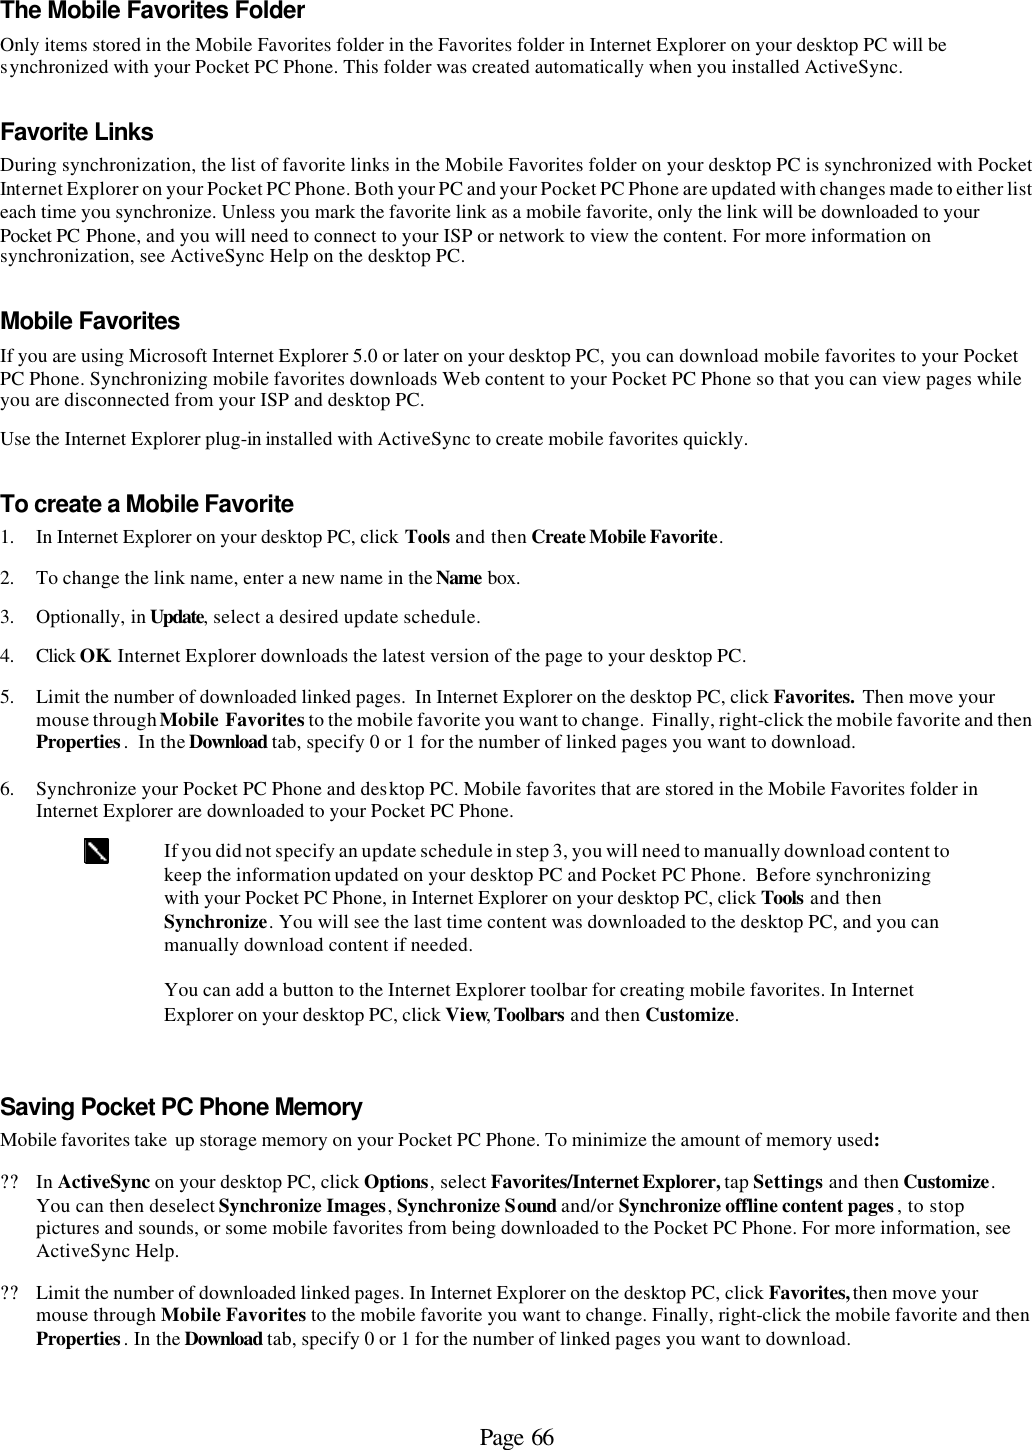 Page 66 The Mobile Favorites Folder Only items stored in the Mobile Favorites folder in the Favorites folder in Internet Explorer on your desktop PC will be synchronized with your Pocket PC Phone. This folder was created automatically when you installed ActiveSync.  Favorite Links During synchronization, the list of favorite links in the Mobile Favorites folder on your desktop PC is synchronized with Pocket Internet Explorer on your Pocket PC Phone. Both your PC and your Pocket PC Phone are updated with changes made to either list each time you synchronize. Unless you mark the favorite link as a mobile favorite, only the link will be downloaded to your Pocket PC Phone, and you will need to connect to your ISP or network to view the content. For more information on synchronization, see ActiveSync Help on the desktop PC. Mobile Favorites  If you are using Microsoft Internet Explorer 5.0 or later on your desktop PC, you can download mobile favorites to your Pocket PC Phone. Synchronizing mobile favorites downloads Web content to your Pocket PC Phone so that you can view pages while you are disconnected from your ISP and desktop PC. Use the Internet Explorer plug-in installed with ActiveSync to create mobile favorites quickly. To create a Mobile Favorite 1. In Internet Explorer on your desktop PC, click Tools and then Create Mobile Favorite. 2. To change the link name, enter a new name in the Name box.  3. Optionally, in Update, select a desired update schedule. 4. Click OK. Internet Explorer downloads the latest version of the page to your desktop PC. 5. Limit the number of downloaded linked pages.  In Internet Explorer on the desktop PC, click Favorites.  Then move your mouse through Mobile Favorites to the mobile favorite you want to change.  Finally, right-click the mobile favorite and then Properties.  In the Download tab, specify 0 or 1 for the number of linked pages you want to download.  6. Synchronize your Pocket PC Phone and desktop PC. Mobile favorites that are stored in the Mobile Favorites folder in Internet Explorer are downloaded to your Pocket PC Phone.  If you did not specify an update schedule in step 3, you will need to manually download content to keep the information updated on your desktop PC and Pocket PC Phone.  Before synchronizing with your Pocket PC Phone, in Internet Explorer on your desktop PC, click Tools and then Synchronize. You will see the last time content was downloaded to the desktop PC, and you can manually download content if needed.   You can add a button to the Internet Explorer toolbar for creating mobile favorites. In Internet Explorer on your desktop PC, click View, Toolbars and then Customize. Saving Pocket PC Phone Memory Mobile favorites take  up storage memory on your Pocket PC Phone. To minimize the amount of memory used: ?? In ActiveSync on your desktop PC, click Options, select Favorites/Internet Explorer, tap Settings and then Customize. You can then deselect Synchronize Images, Synchronize Sound and/or Synchronize offline content pages, to stop pictures and sounds, or some mobile favorites from being downloaded to the Pocket PC Phone. For more information, see ActiveSync Help. ?? Limit the number of downloaded linked pages. In Internet Explorer on the desktop PC, click Favorites, then move your mouse through Mobile Favorites to the mobile favorite you want to change. Finally, right-click the mobile favorite and then Properties. In the Download tab, specify 0 or 1 for the number of linked pages you want to download.  